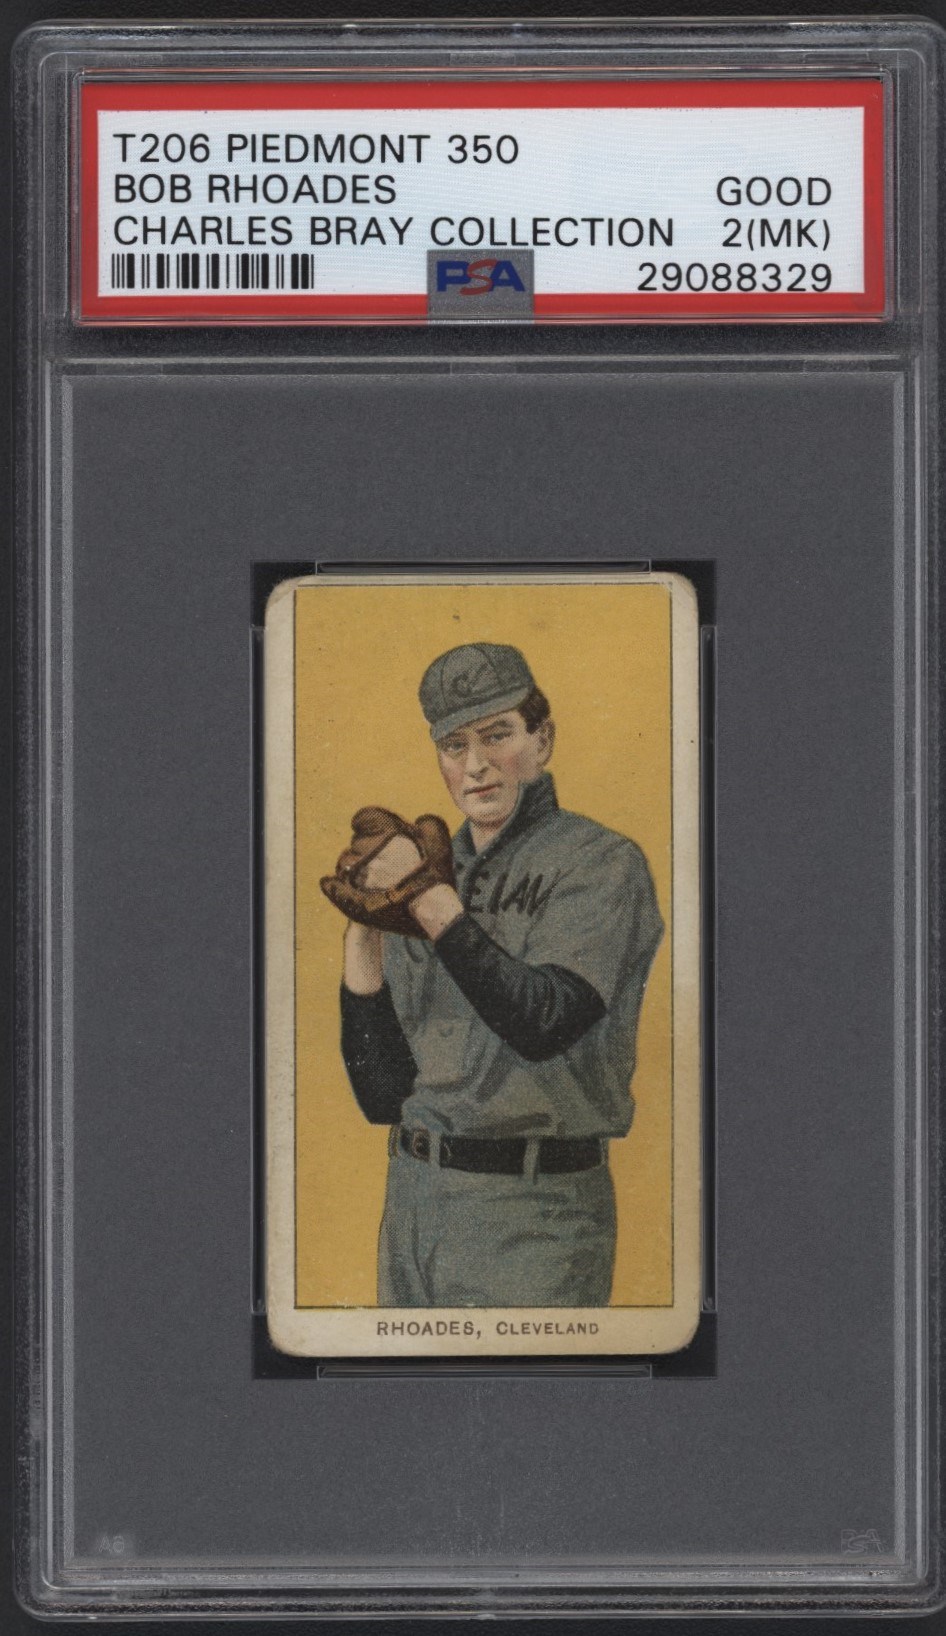 T206 Piedmont 350 Bob Rhodes PSA 2 From the Charles Bray Collection